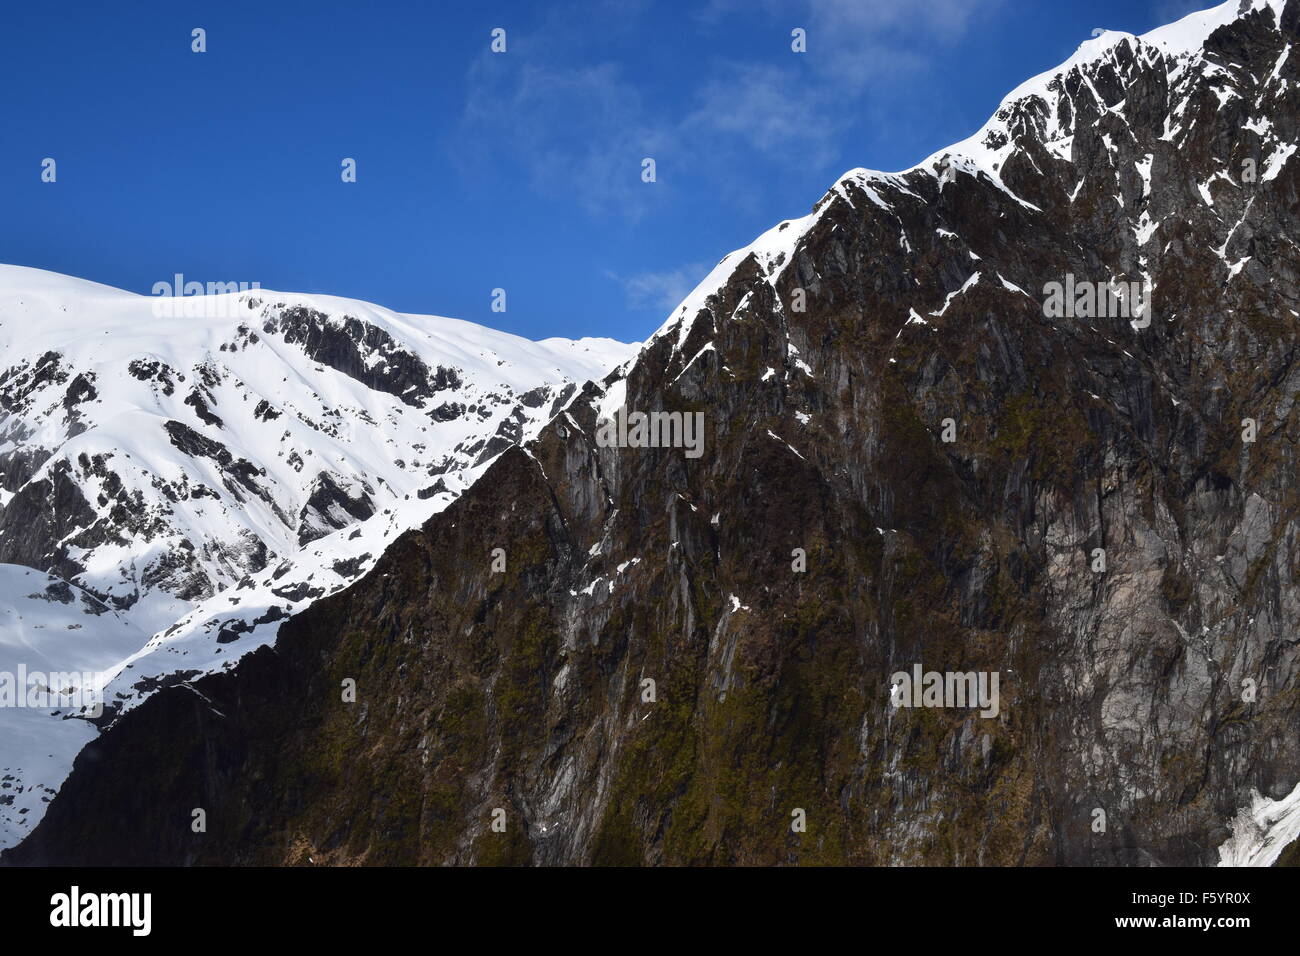 Snow capped Remarkables mountain range near Queenstown in the beautiful South Island of New Zealand. Stock Photo